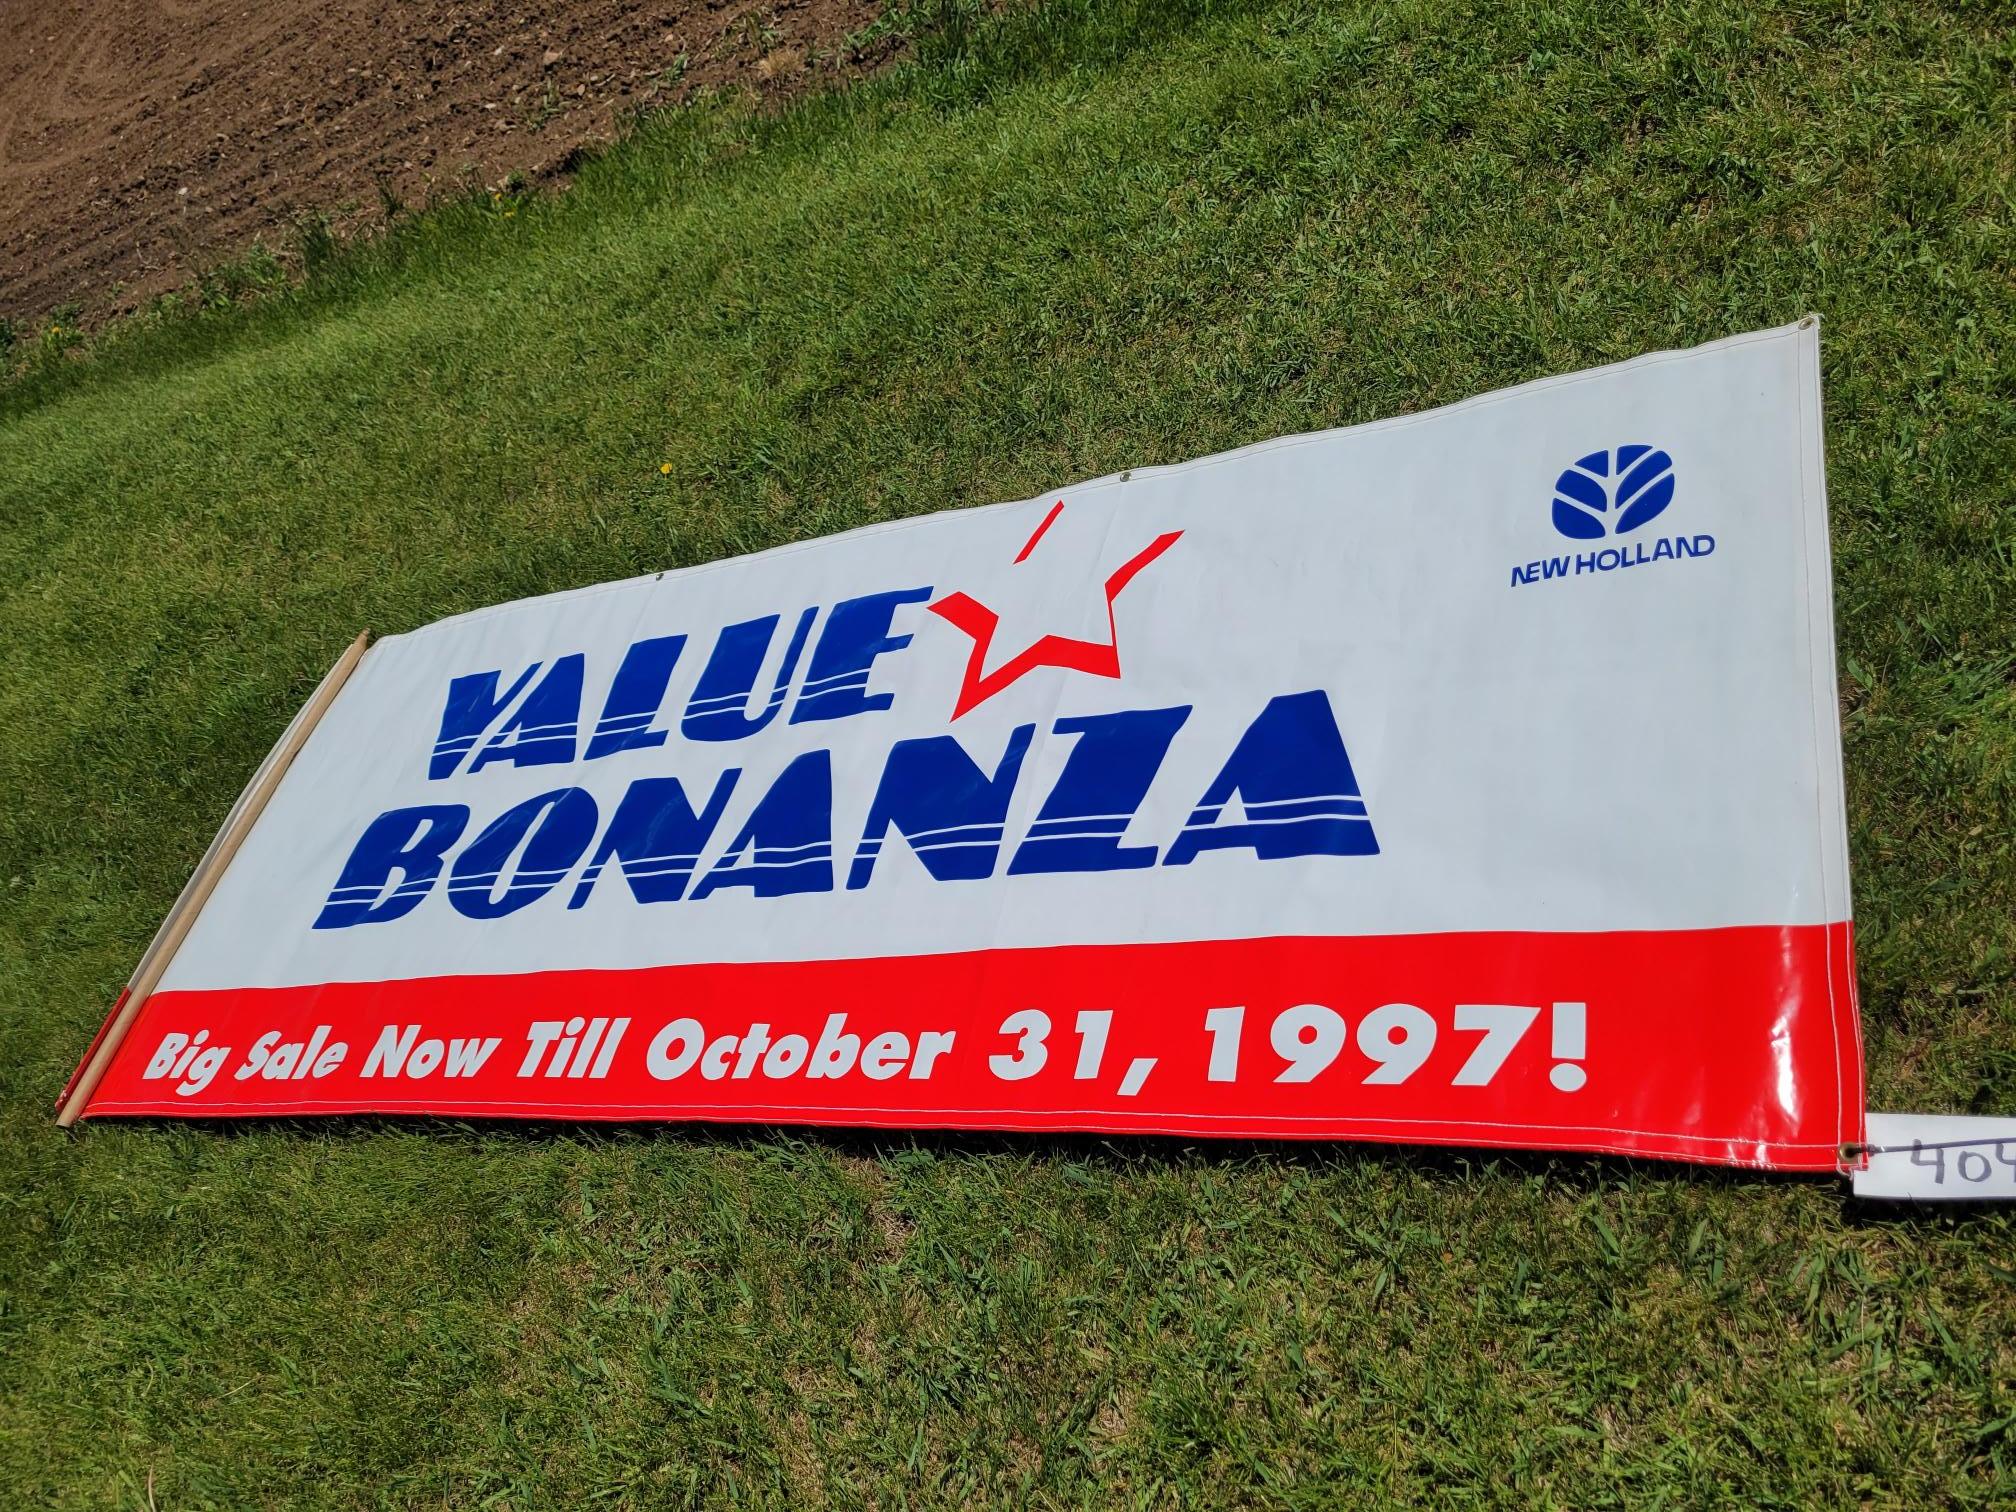 New Holland Promotional Banner